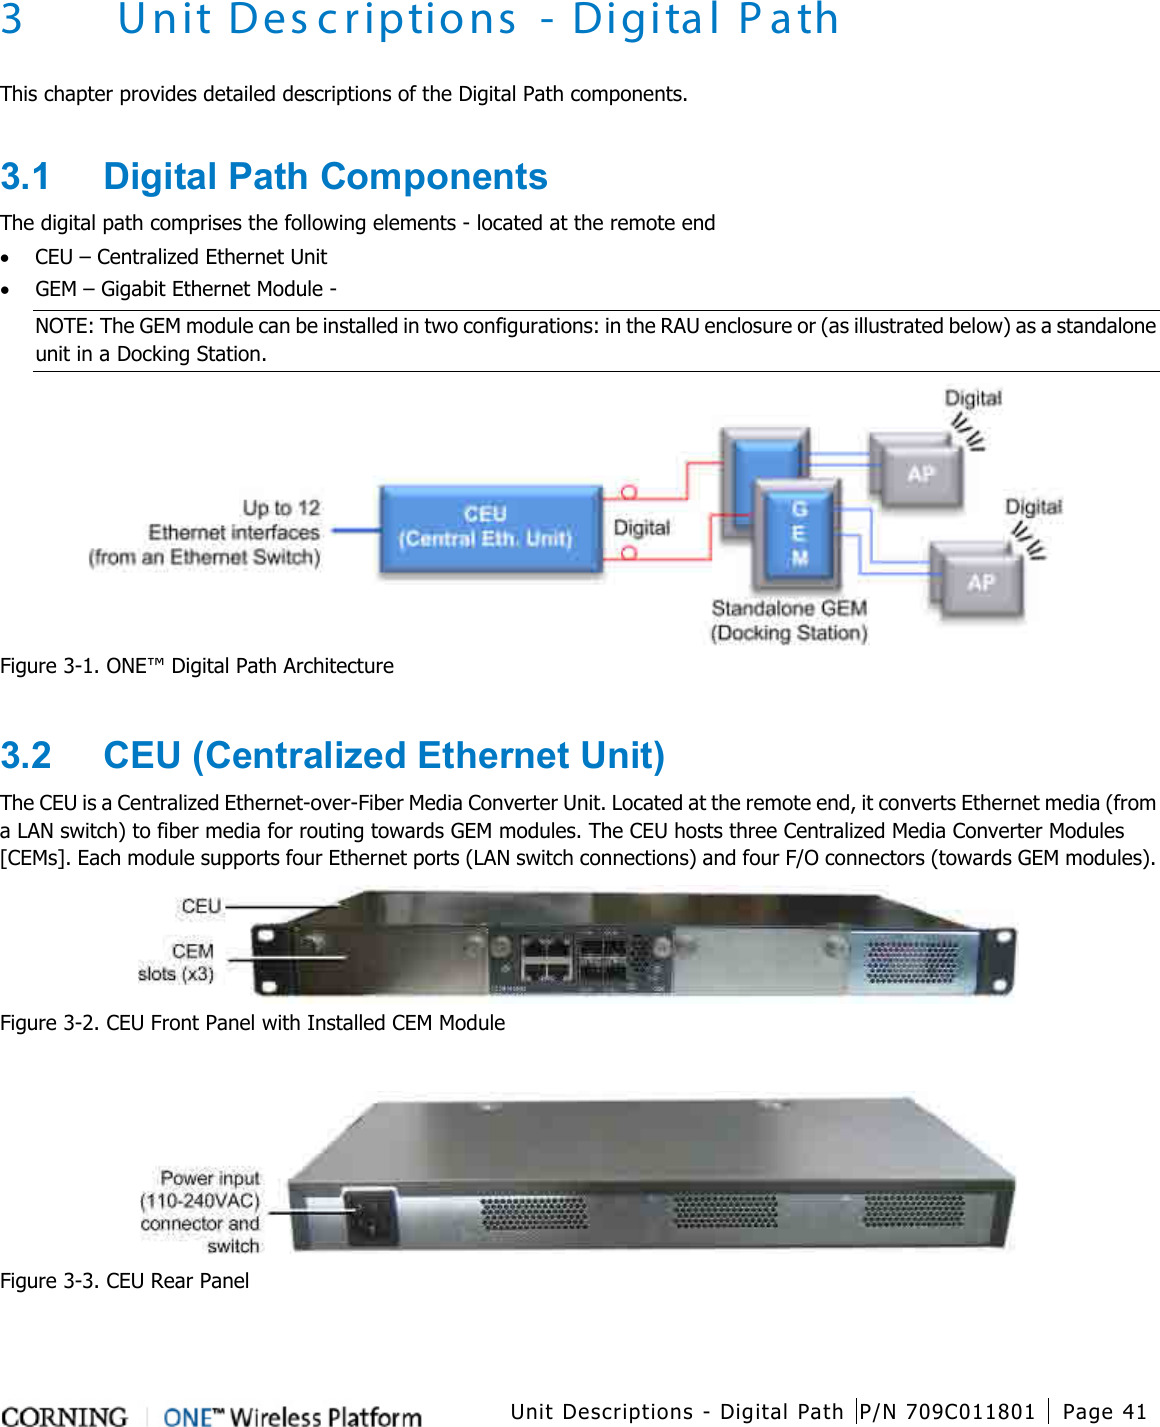  Unit Descriptions - Digital Path P/N 709C011801 Page 41    3 Unit Descriptions - Digital Path This chapter provides detailed descriptions of the Digital Path components.    3.1  Digital Path Components The digital path comprises the following elements - located at the remote end • CEU – Centralized Ethernet Unit • GEM – Gigabit Ethernet Module -   NOTE: The GEM module can be installed in two configurations: in the RAU enclosure or (as illustrated below) as a standalone unit in a Docking Station.  Figure  3-1. ONE™ Digital Path Architecture  3.2  CEU (Centralized Ethernet Unit) The CEU is a Centralized Ethernet-over-Fiber Media Converter Unit. Located at the remote end, it converts Ethernet media (from a LAN switch) to fiber media for routing towards GEM modules. The CEU hosts three Centralized Media Converter Modules [CEMs]. Each module supports four Ethernet ports (LAN switch connections) and four F/O connectors (towards GEM modules).  Figure  3-2. CEU Front Panel with Installed CEM Module   Figure  3-3. CEU Rear Panel  